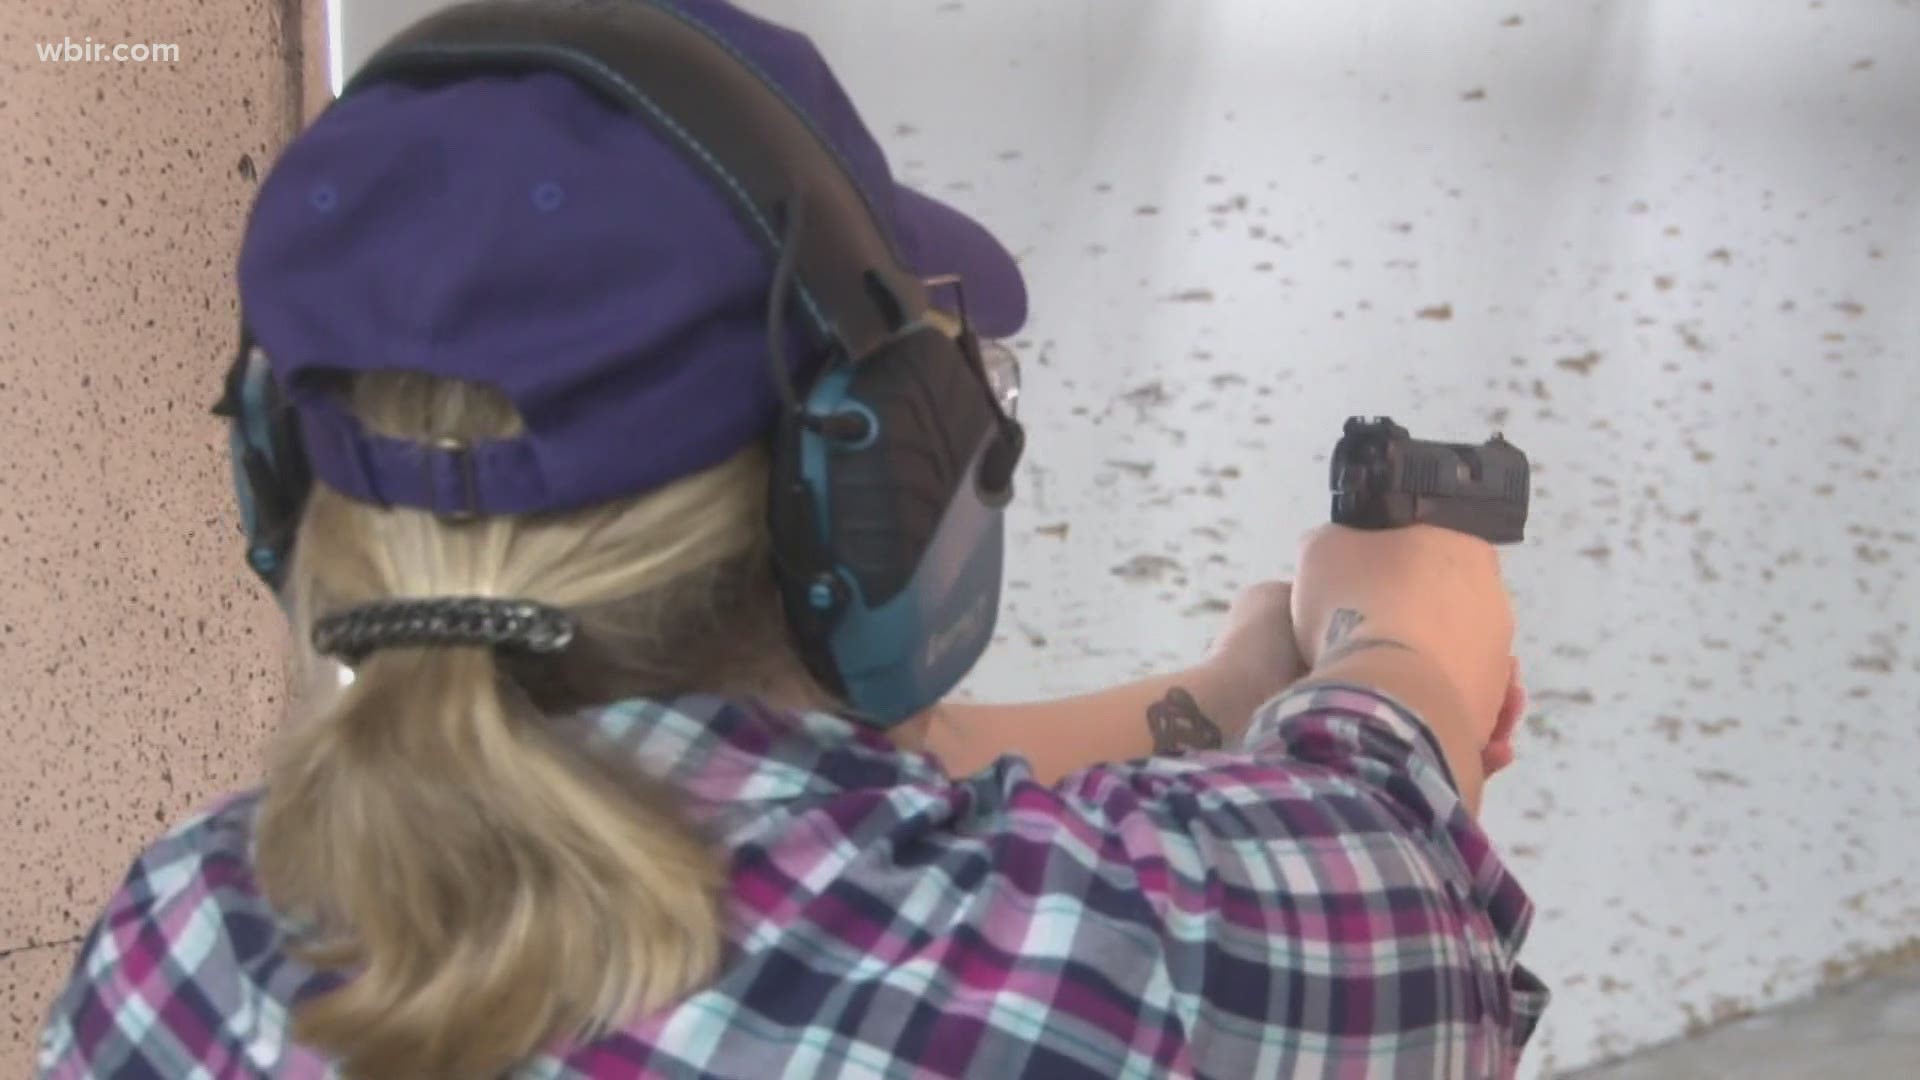 A bill supported by the governor eliminates the need for a gun permit in Tennessee.